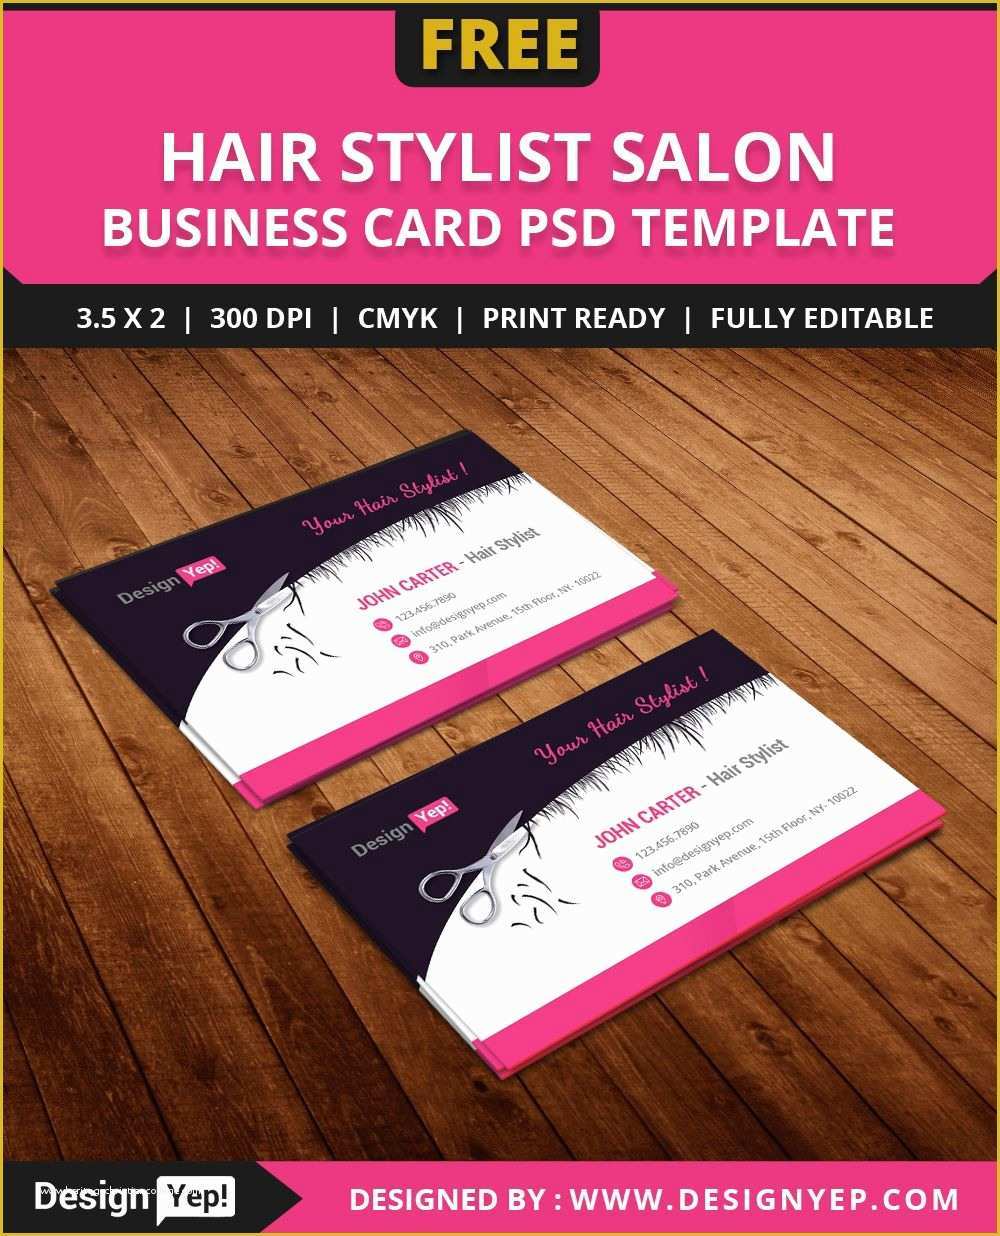 Free Business Card Templates Of Free Hair Stylist Salon Business Card Template Psd